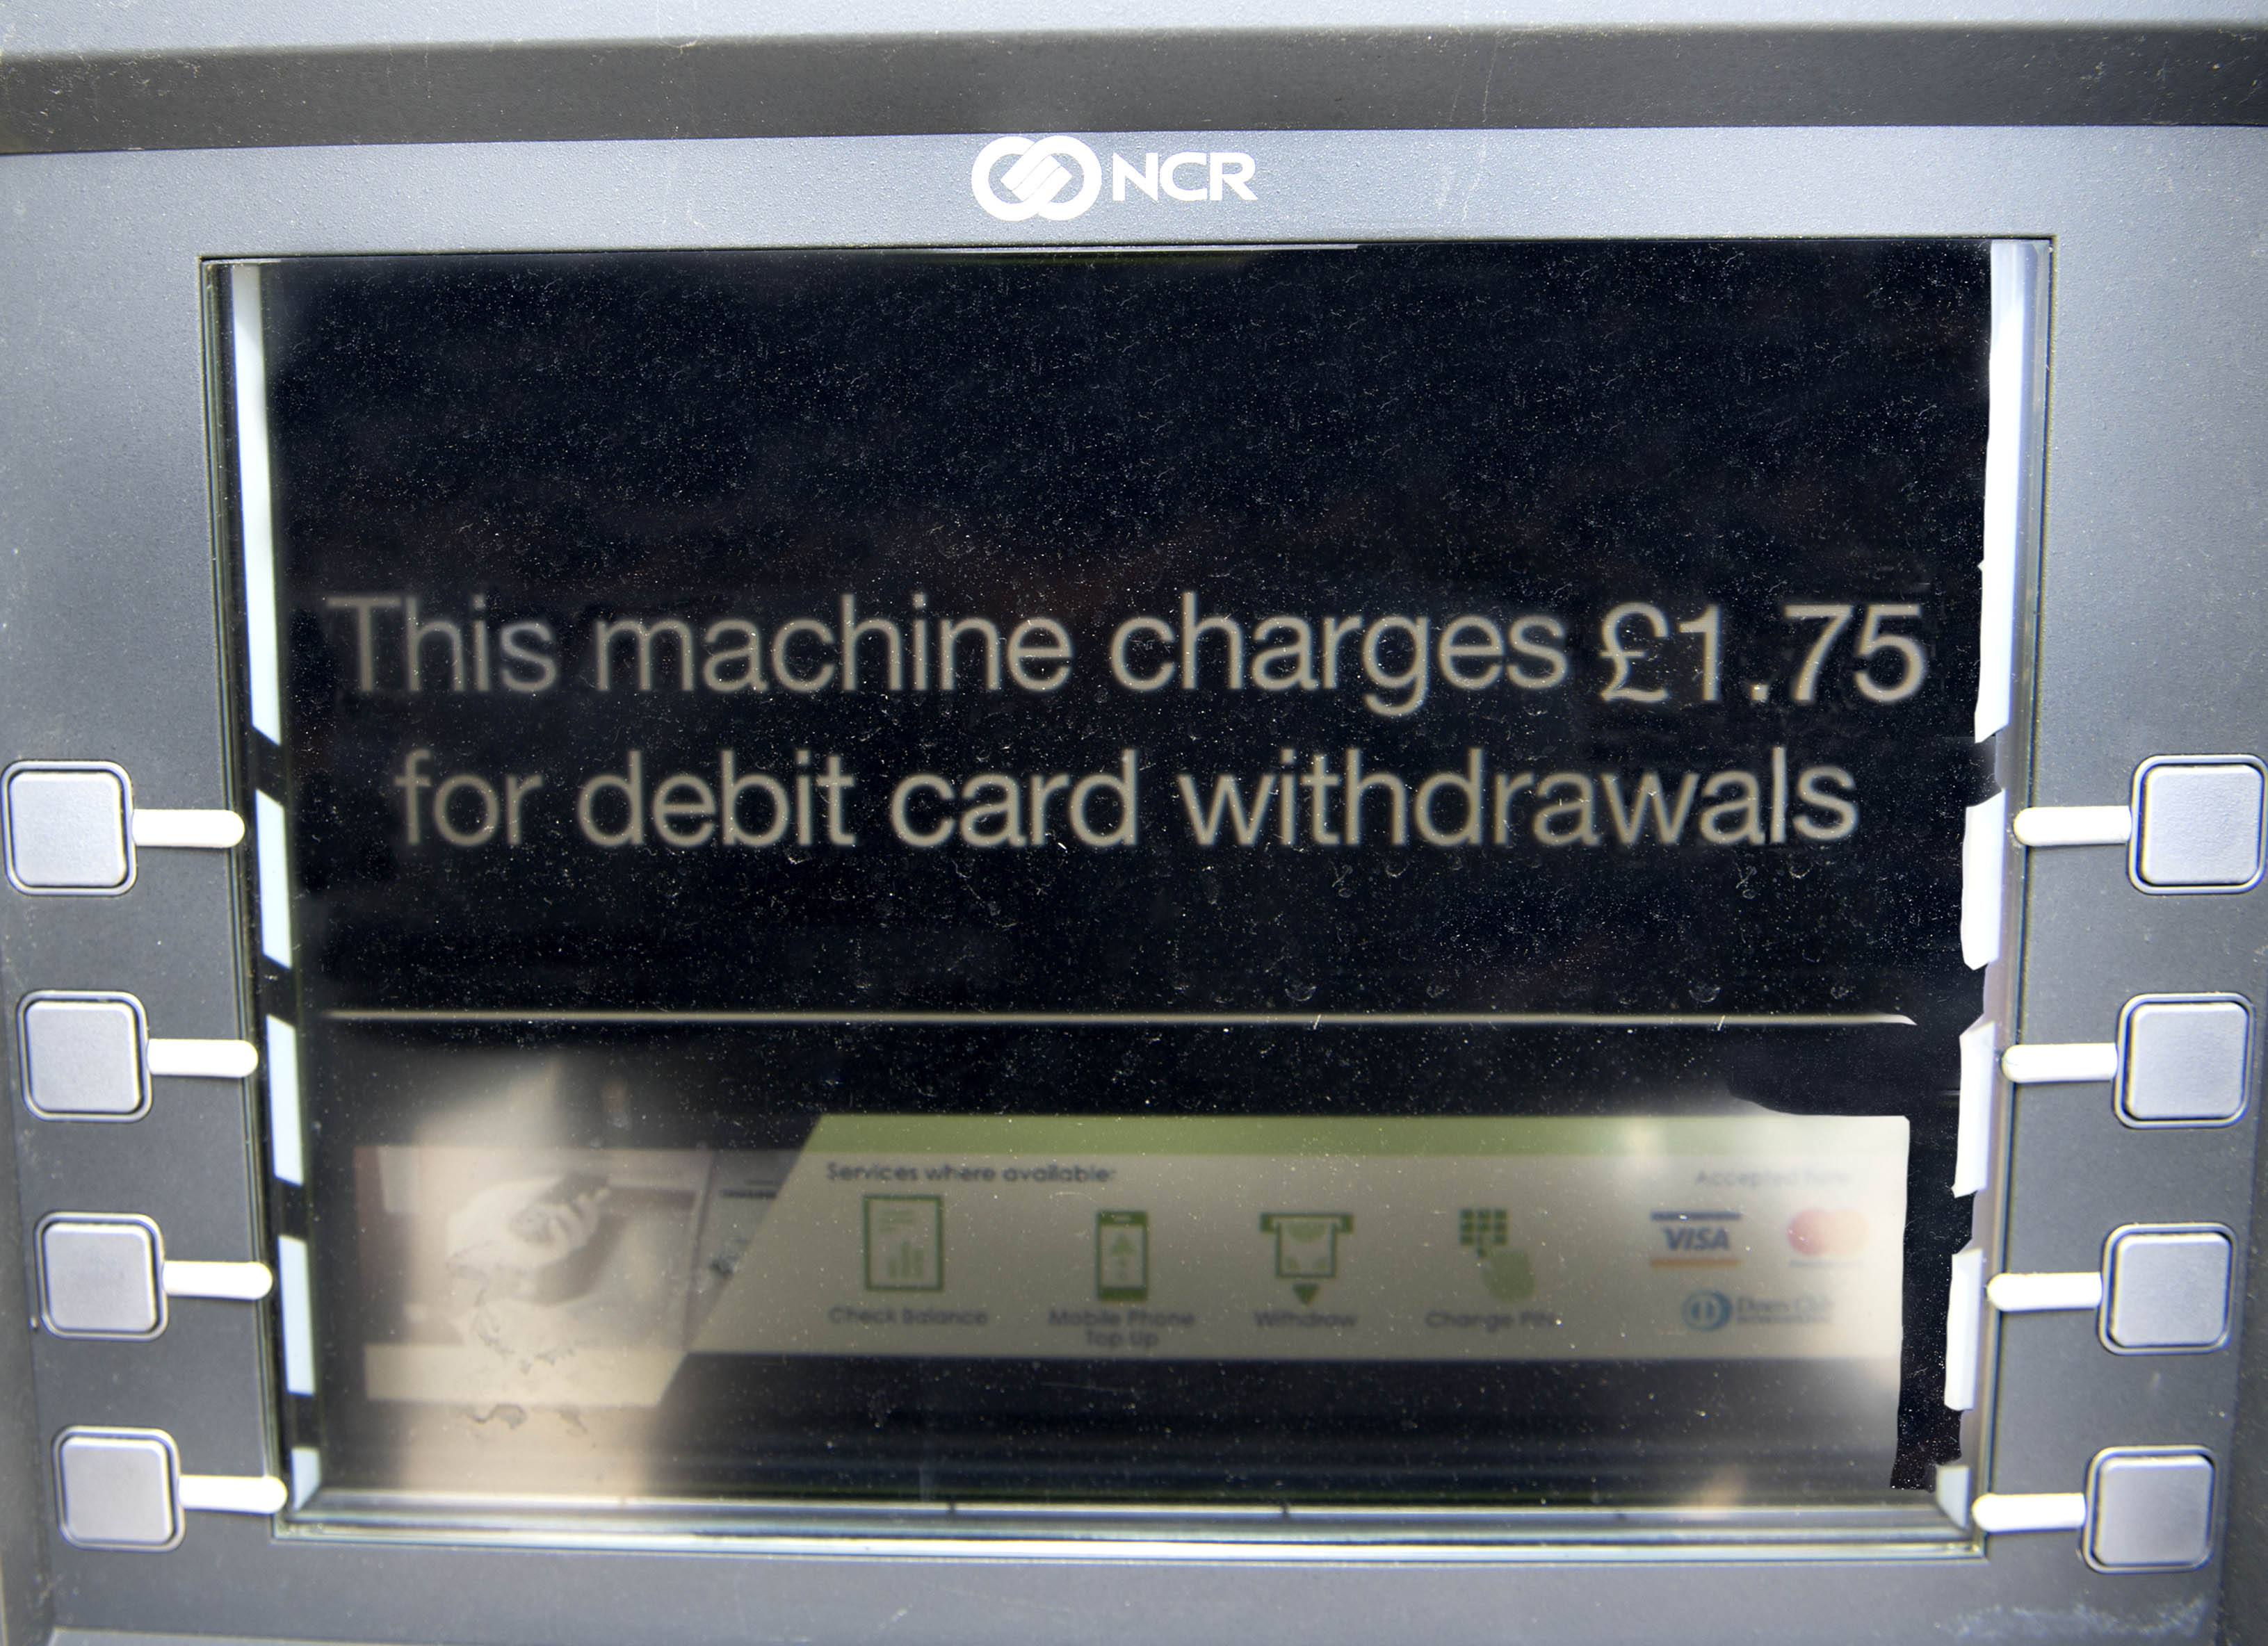 Many ATMs now charge for withdrawals